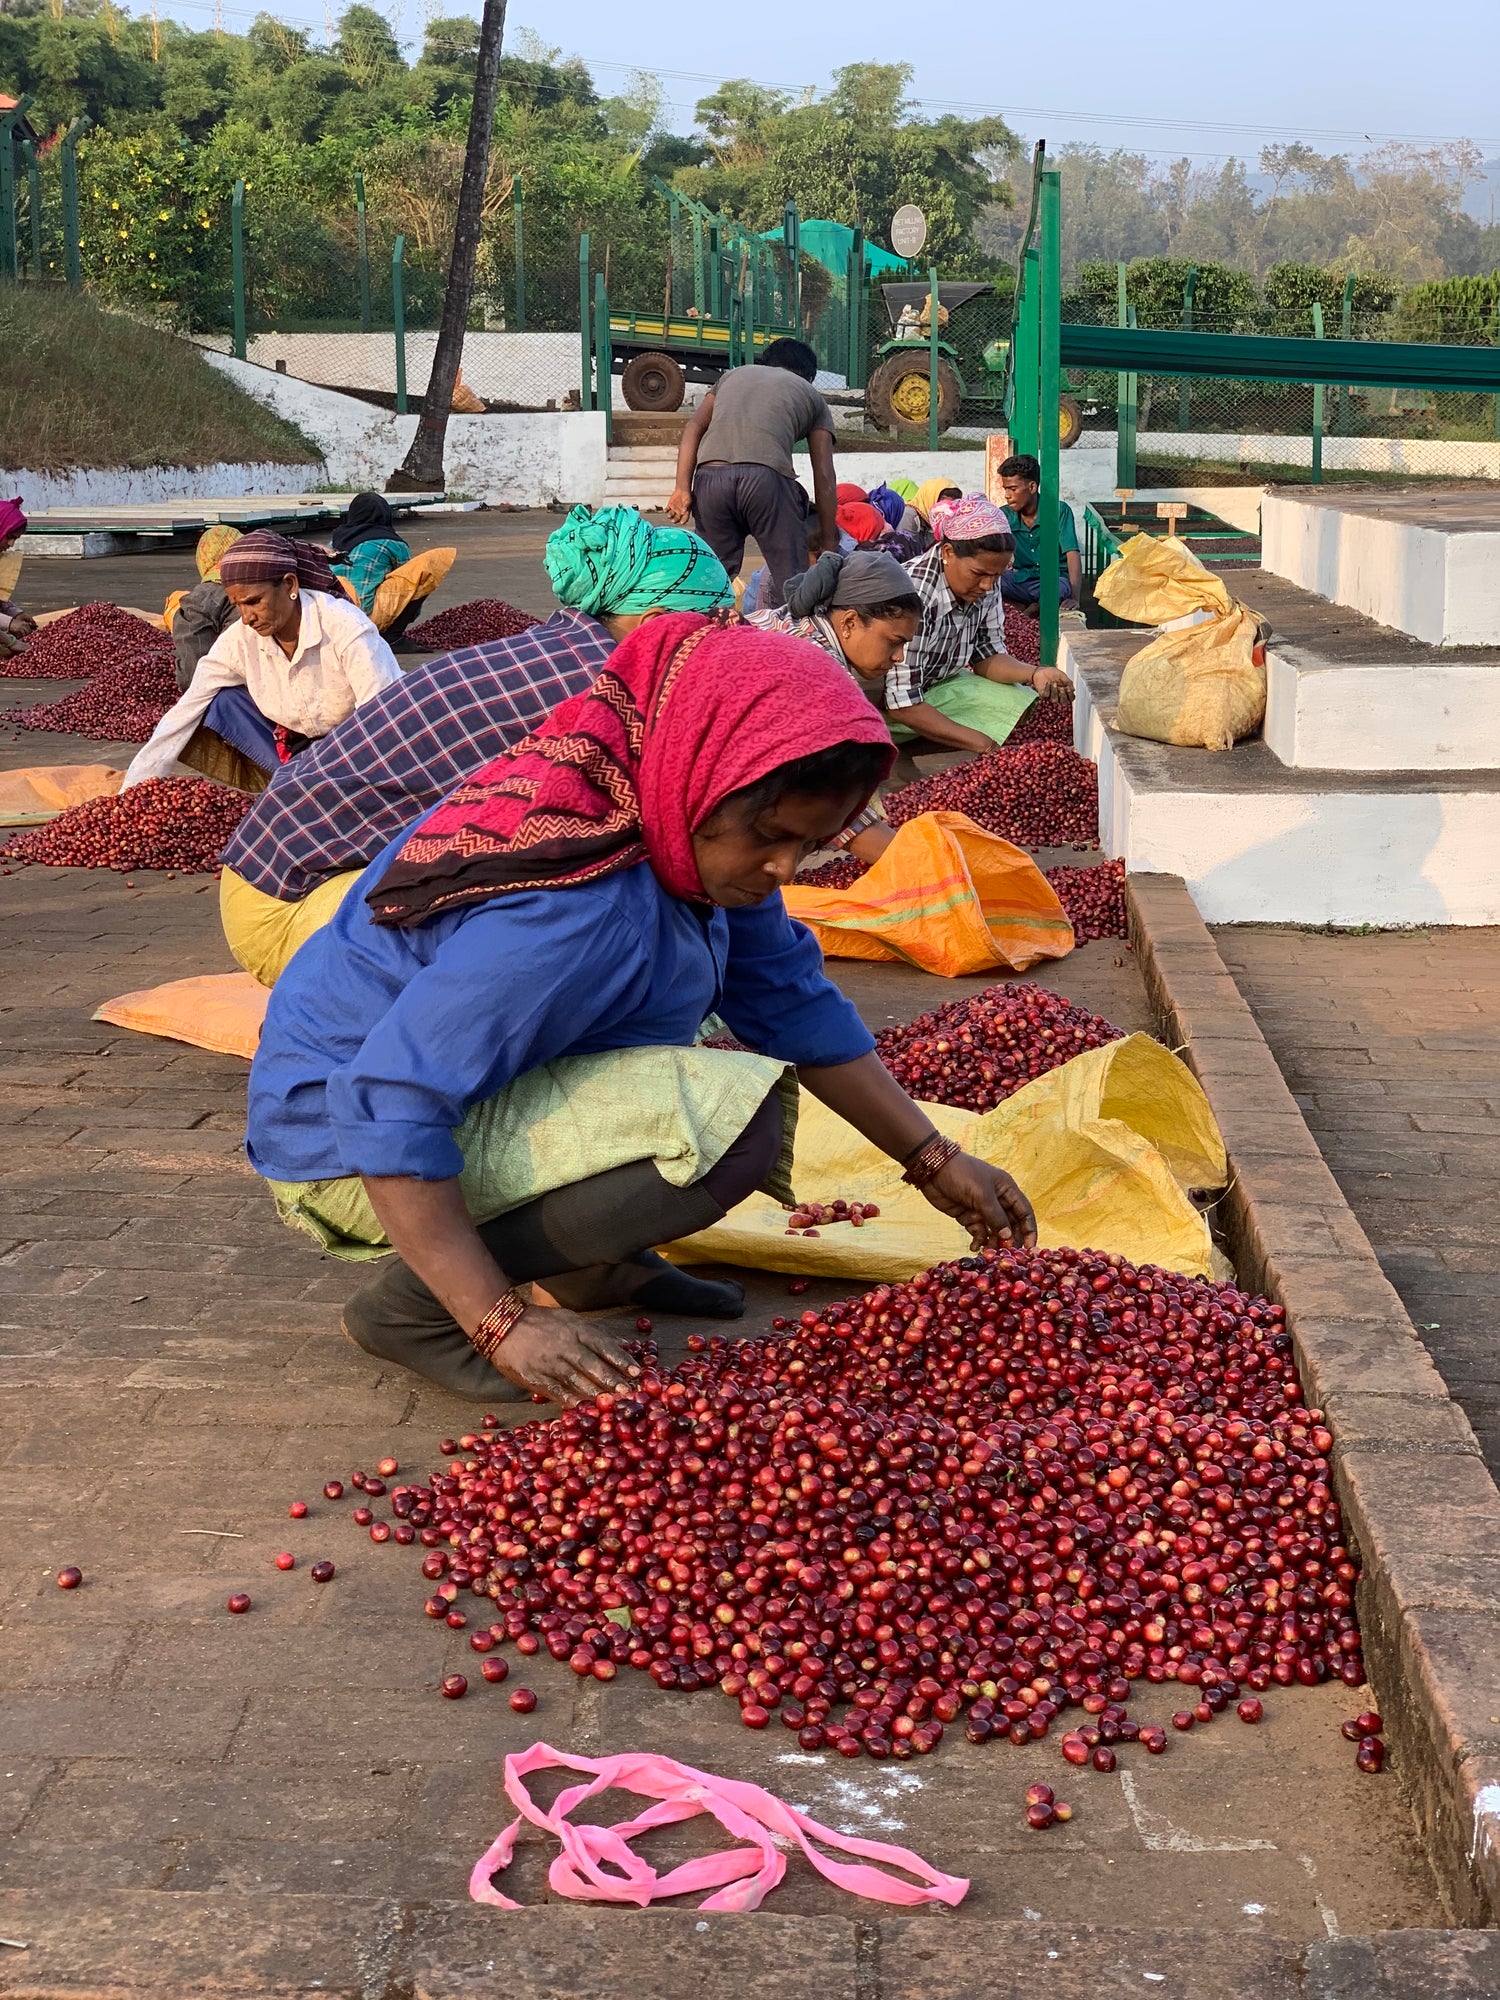 India’s coffee history and culture